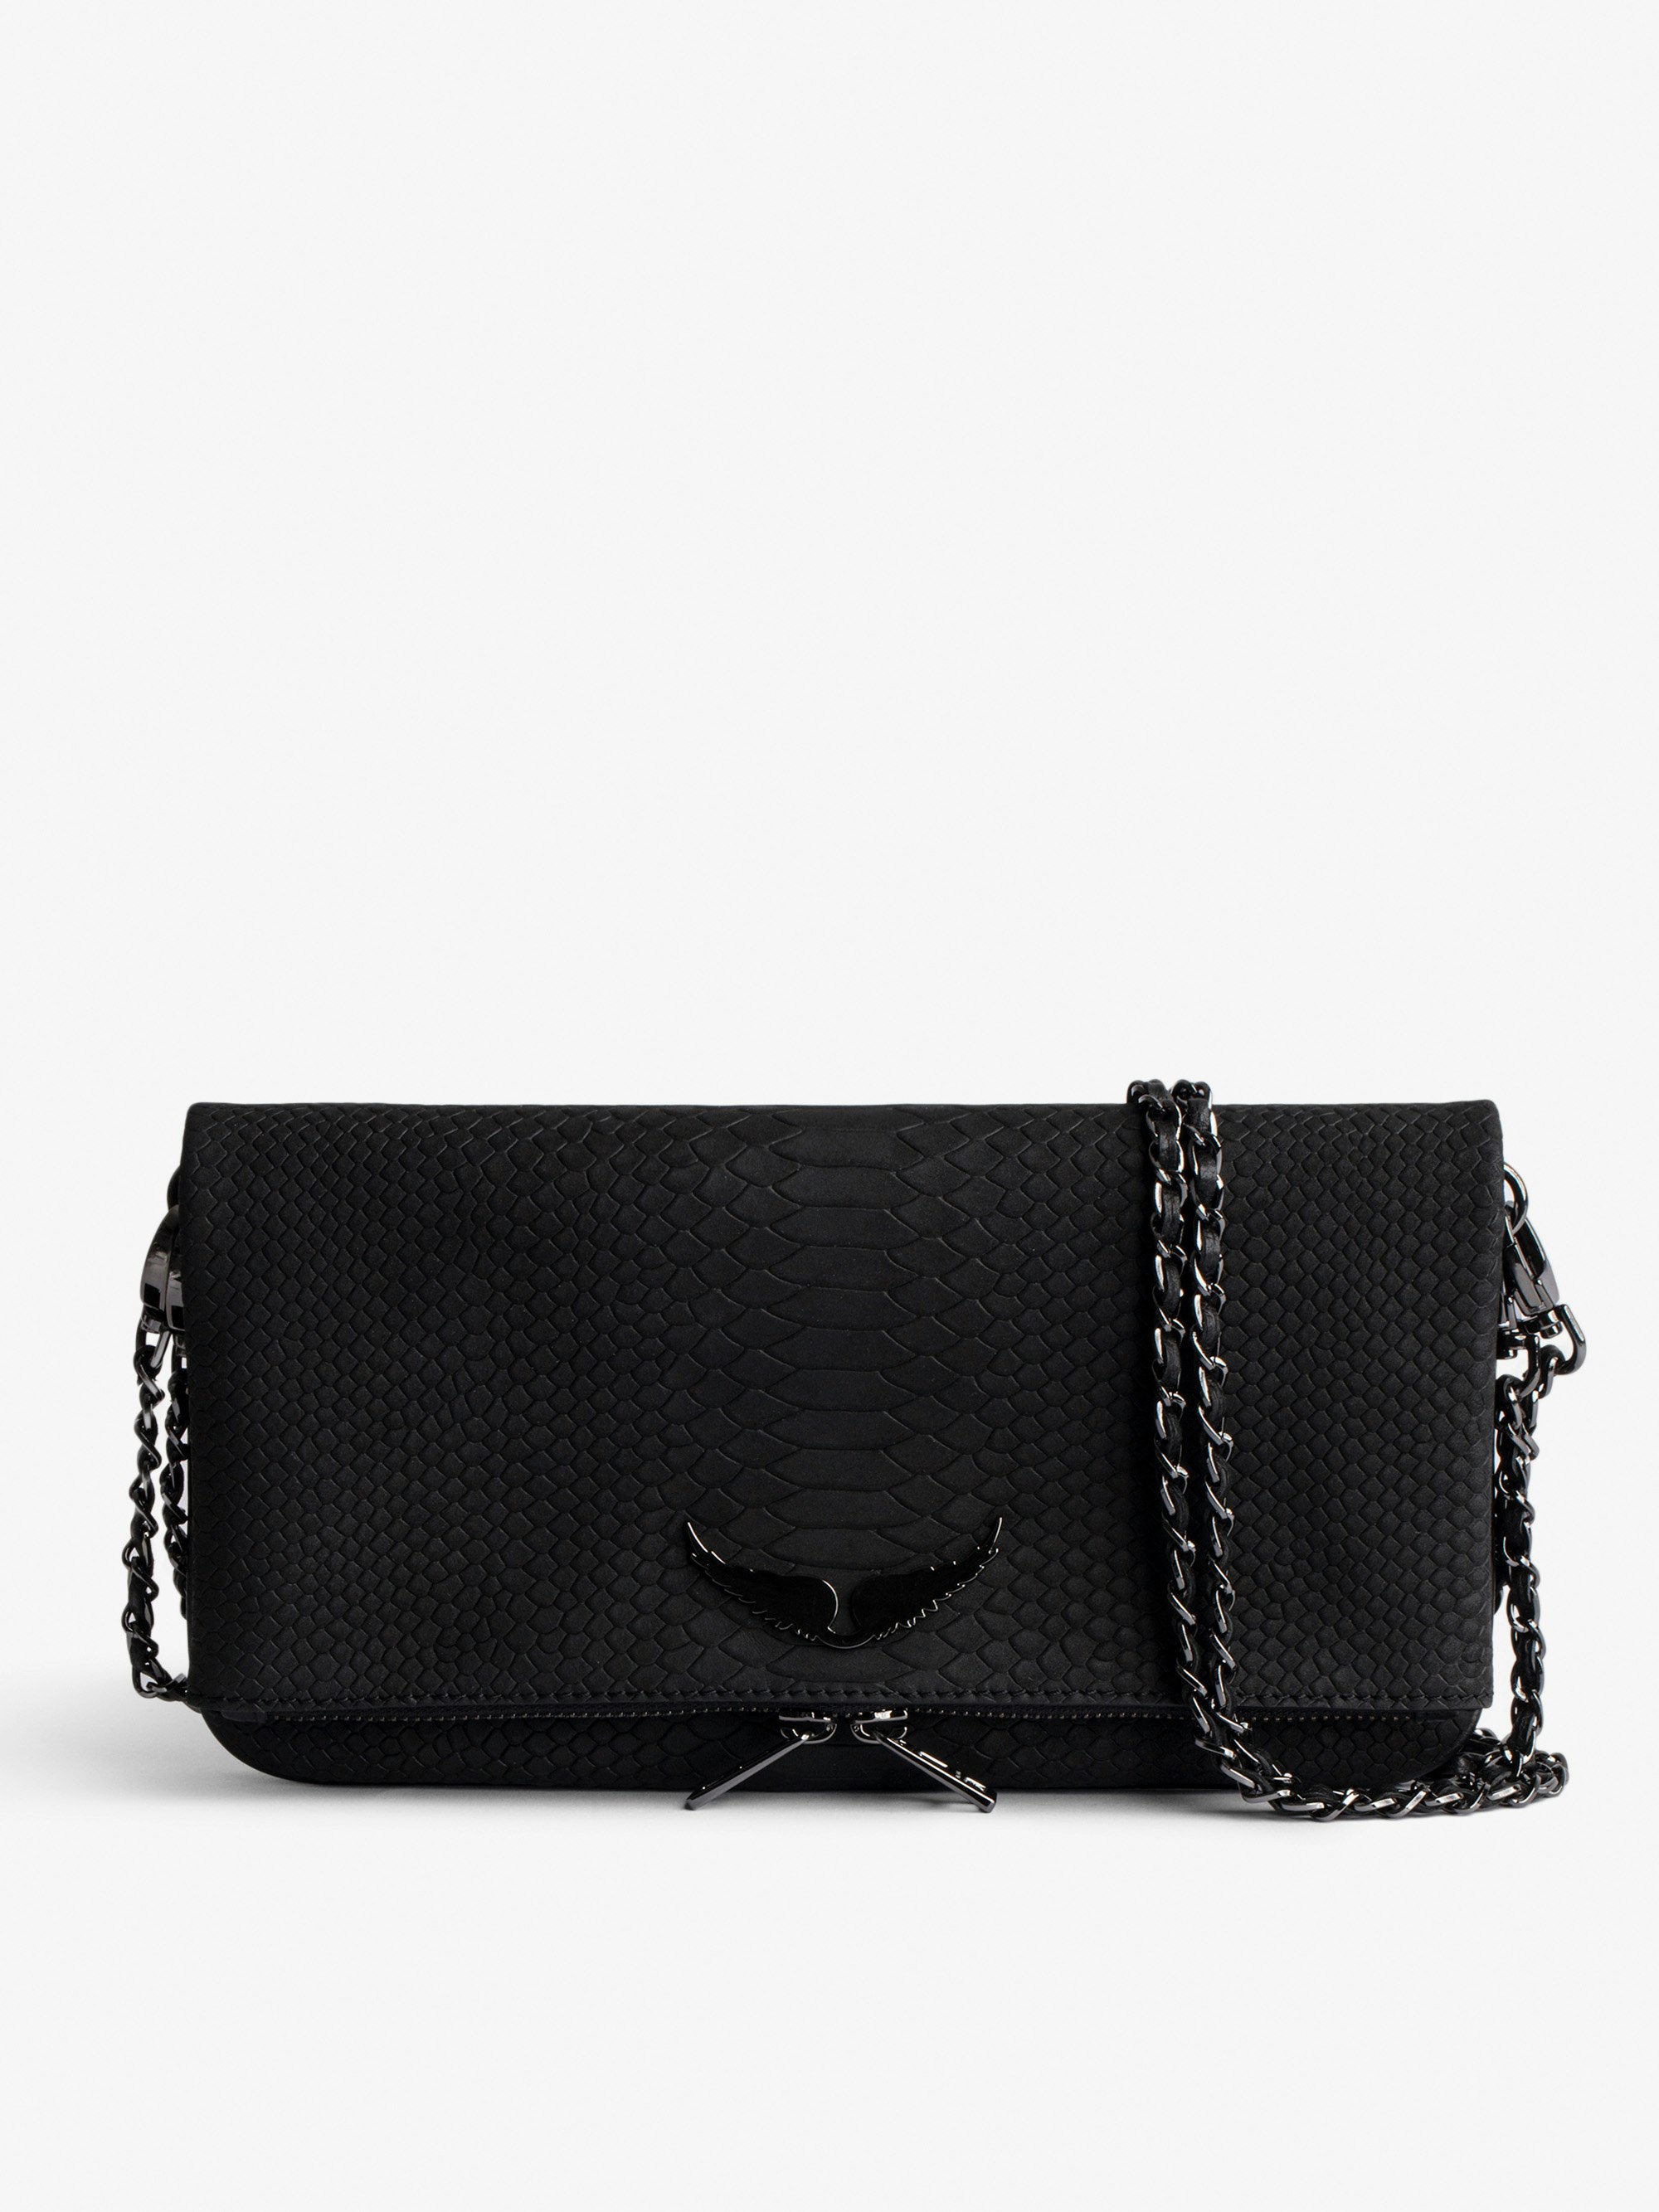 Rock Soft Savage Clutch - Women’s clutch in black python-effect leather with double leather-and-metal chain